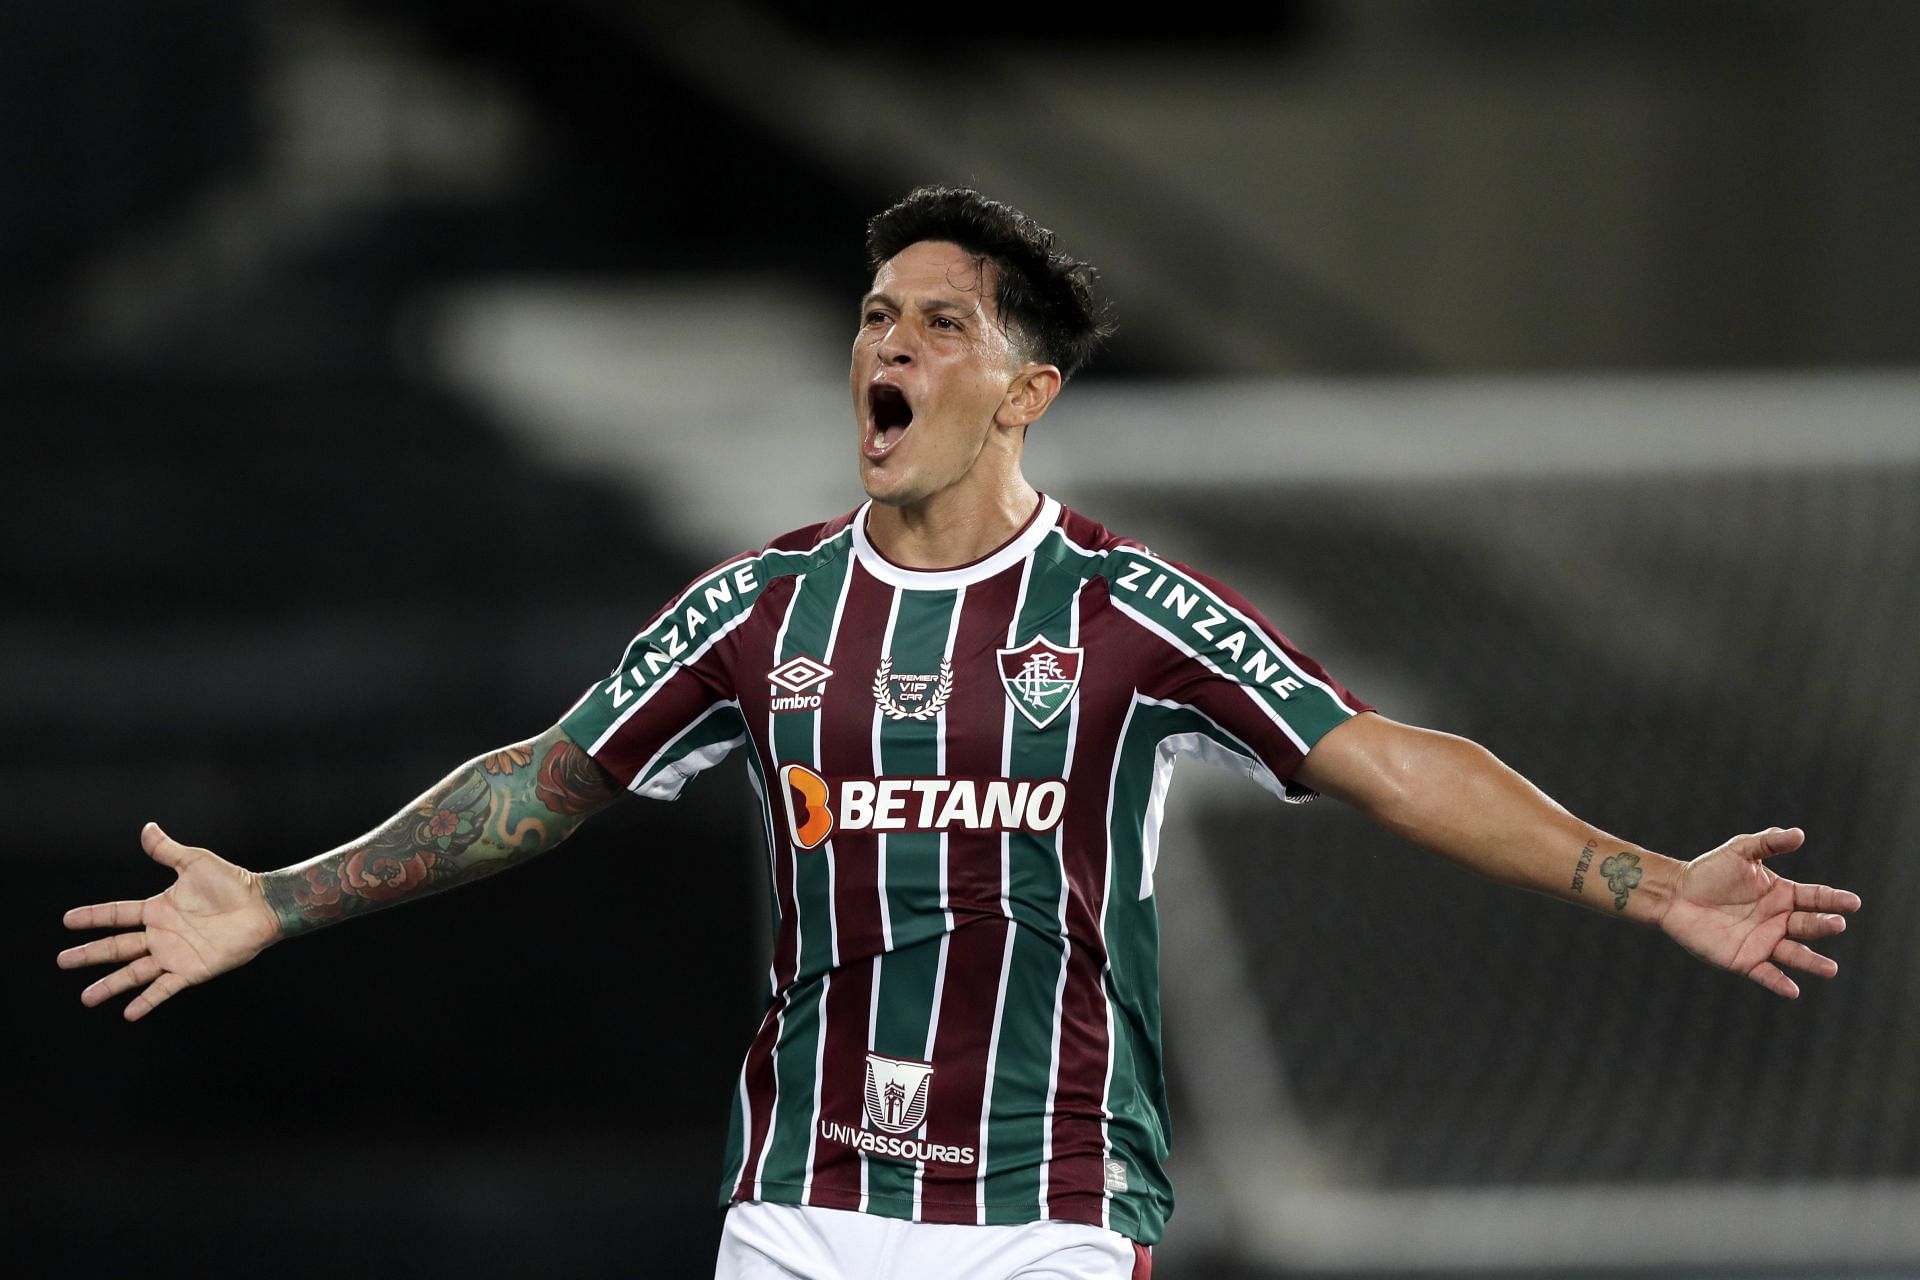 Olimpia will be hoping to secure a win at home against Fluminense